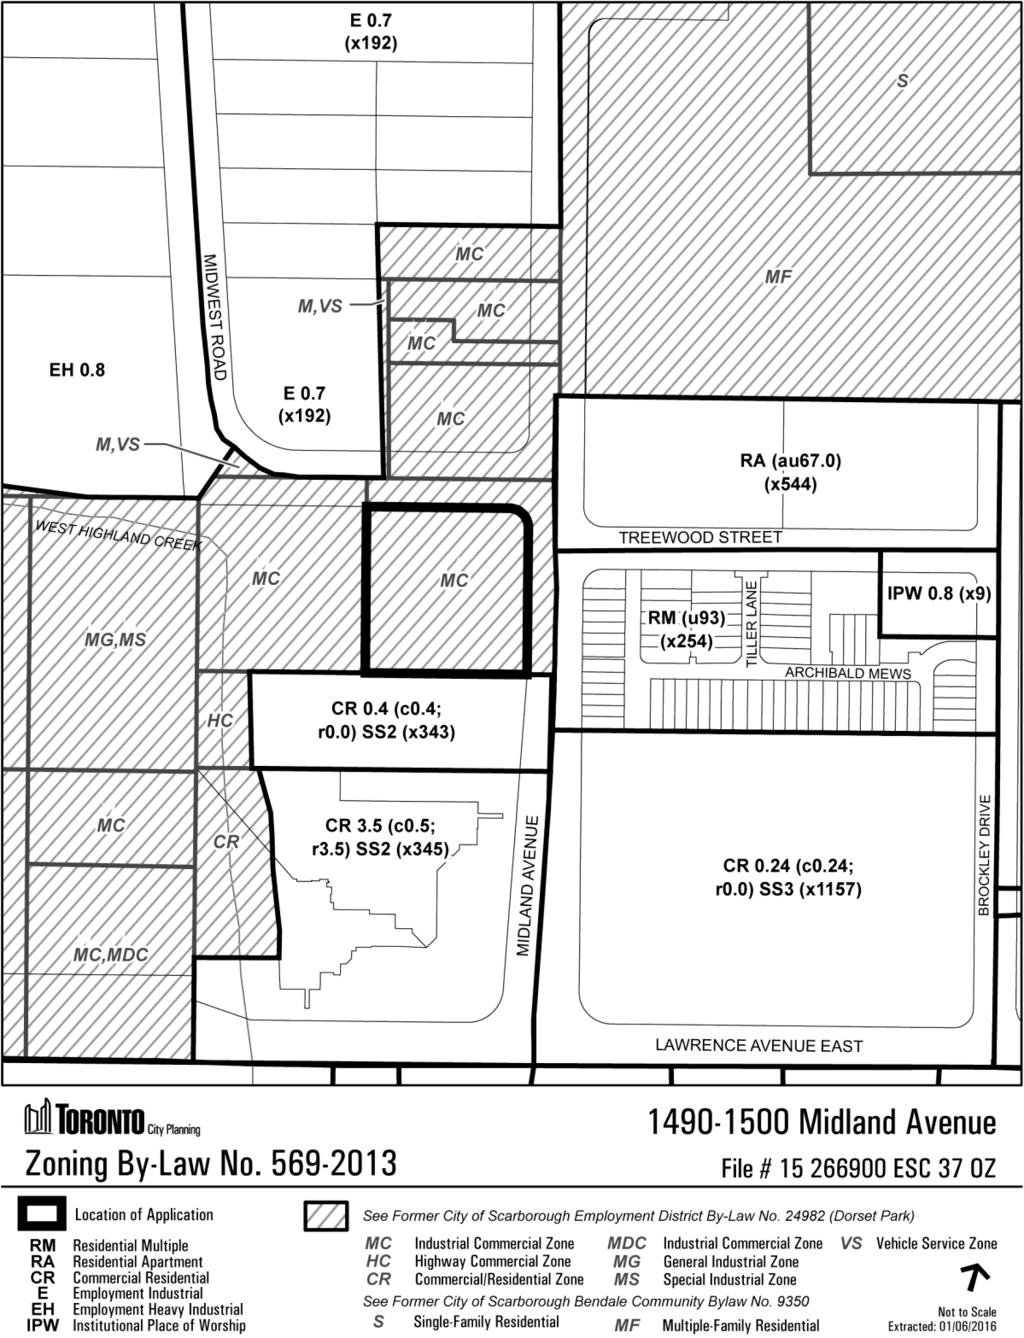 Attachment 2: Zoning Staff report for